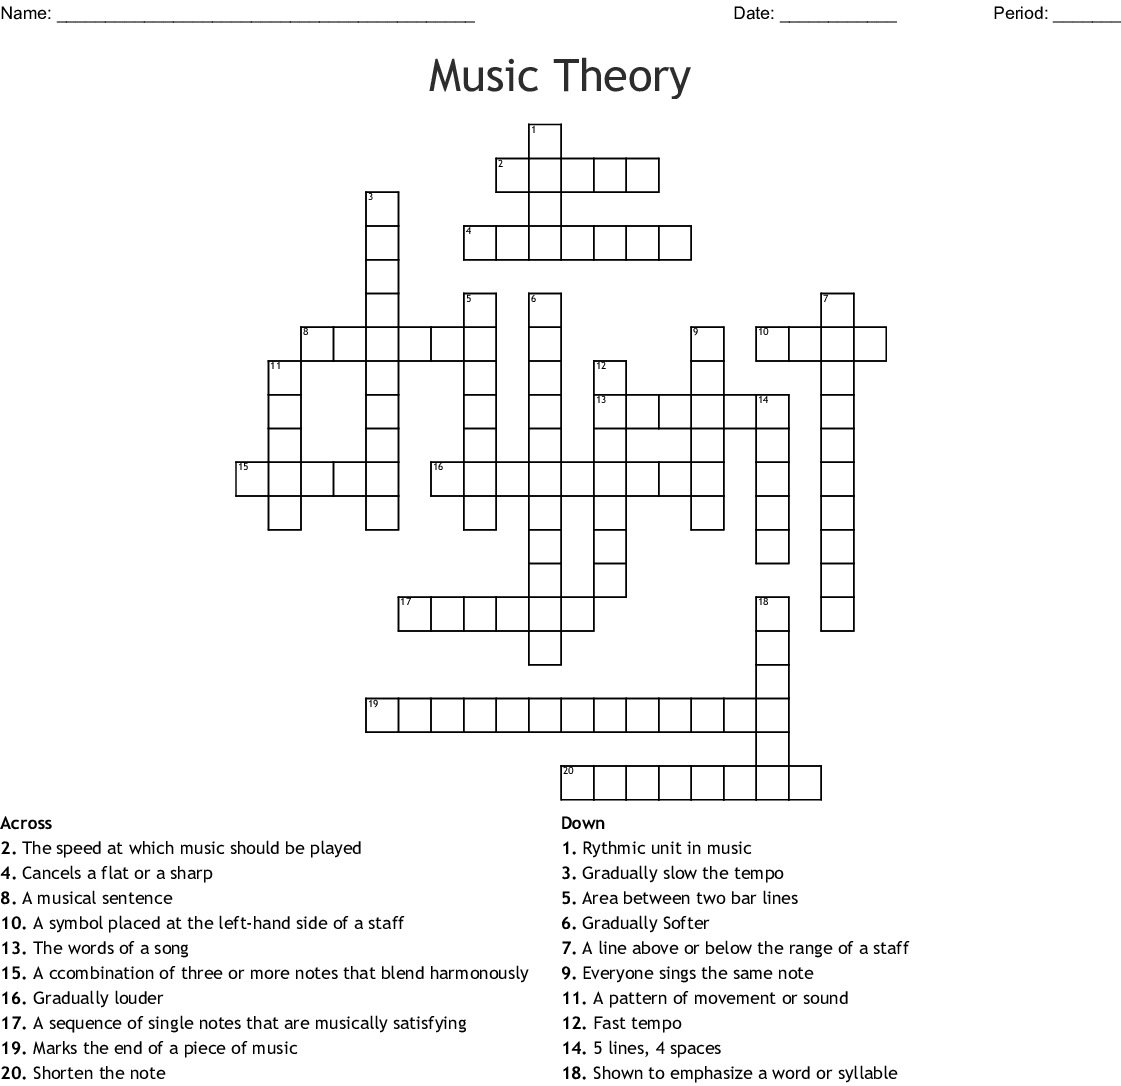 Music Theory Crossword - Wordmint - Printable Crossword Puzzles About Music